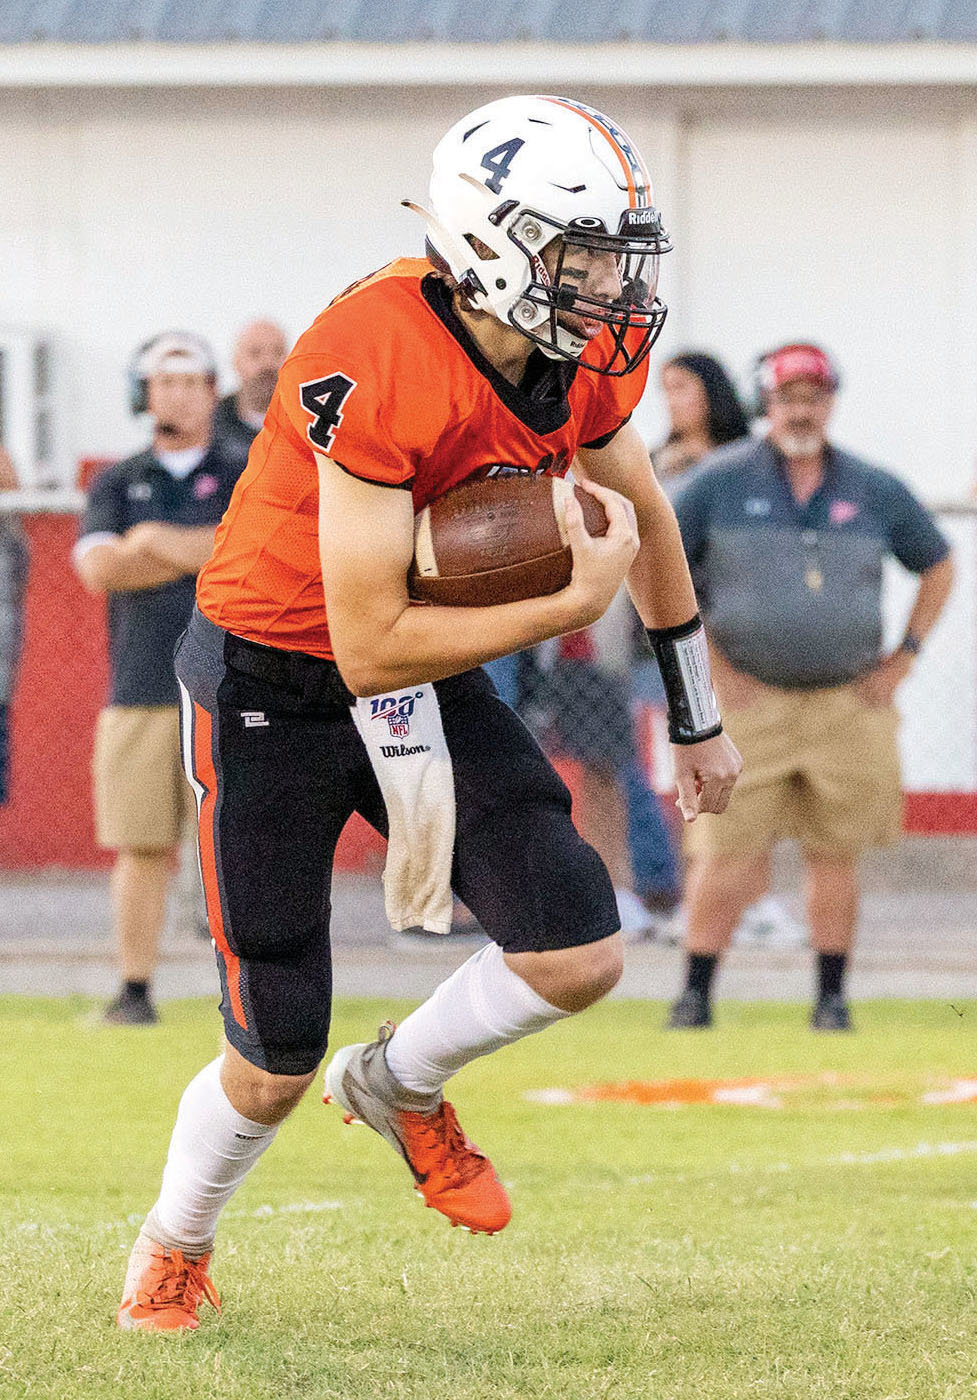 Lexington senior Tate Collier runs with the ball last Friday night against Purcell. The Bulldogs were defeated 51-6. Lexington opens District play Friday when they host Tishomingo at 7:30 p.m.